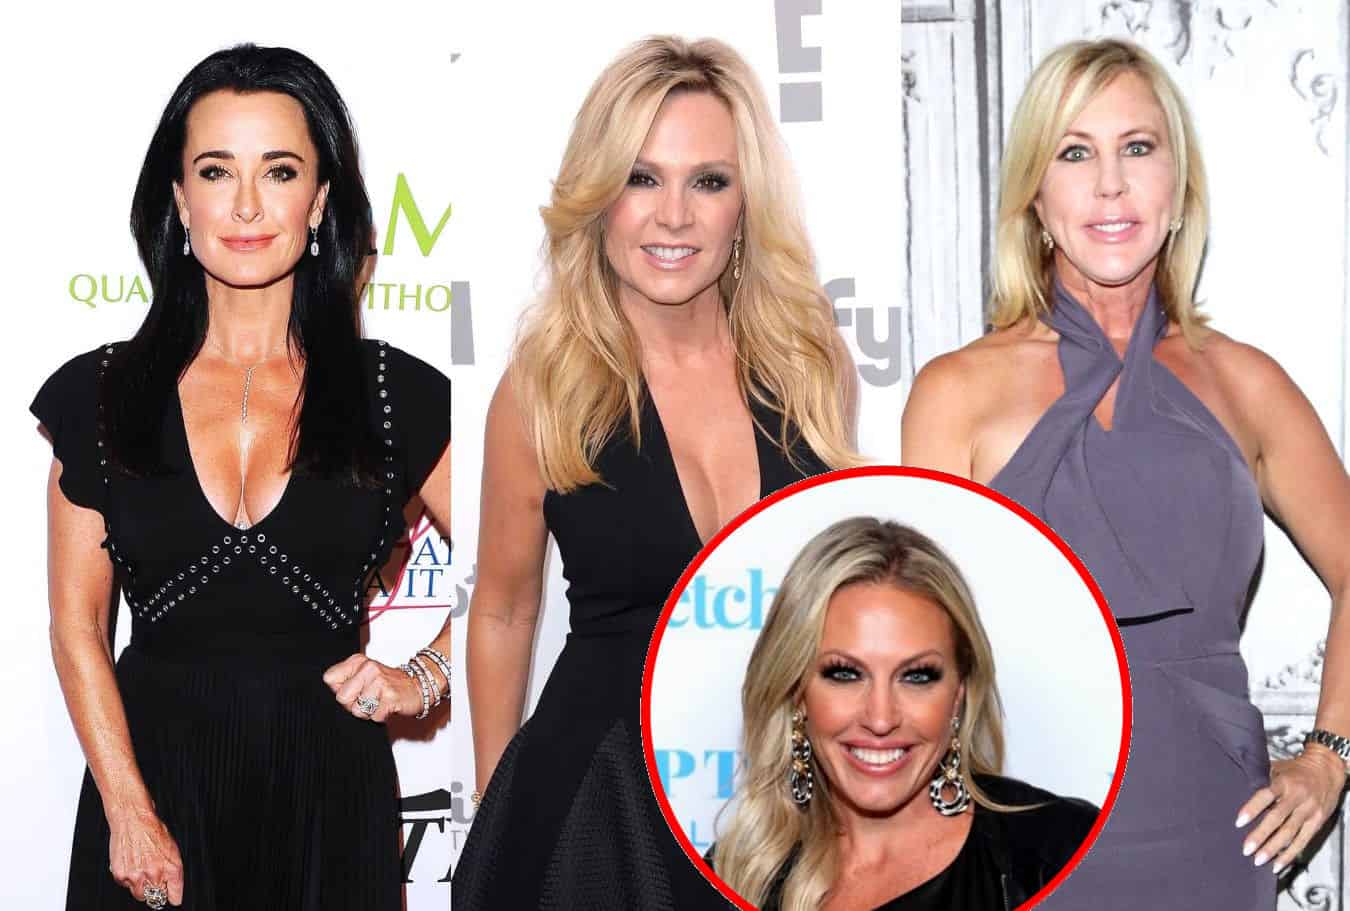 RHOBH Star Kyle Richards Claps Back at Tamra Judge and Vicki Gunvalson for Dissing Her as “Vanilla” as She Shades Tamra for Kissing Braunwyn, Plus Kyle Insists Brandi is Not a "Liar" Amid Affair Rumors